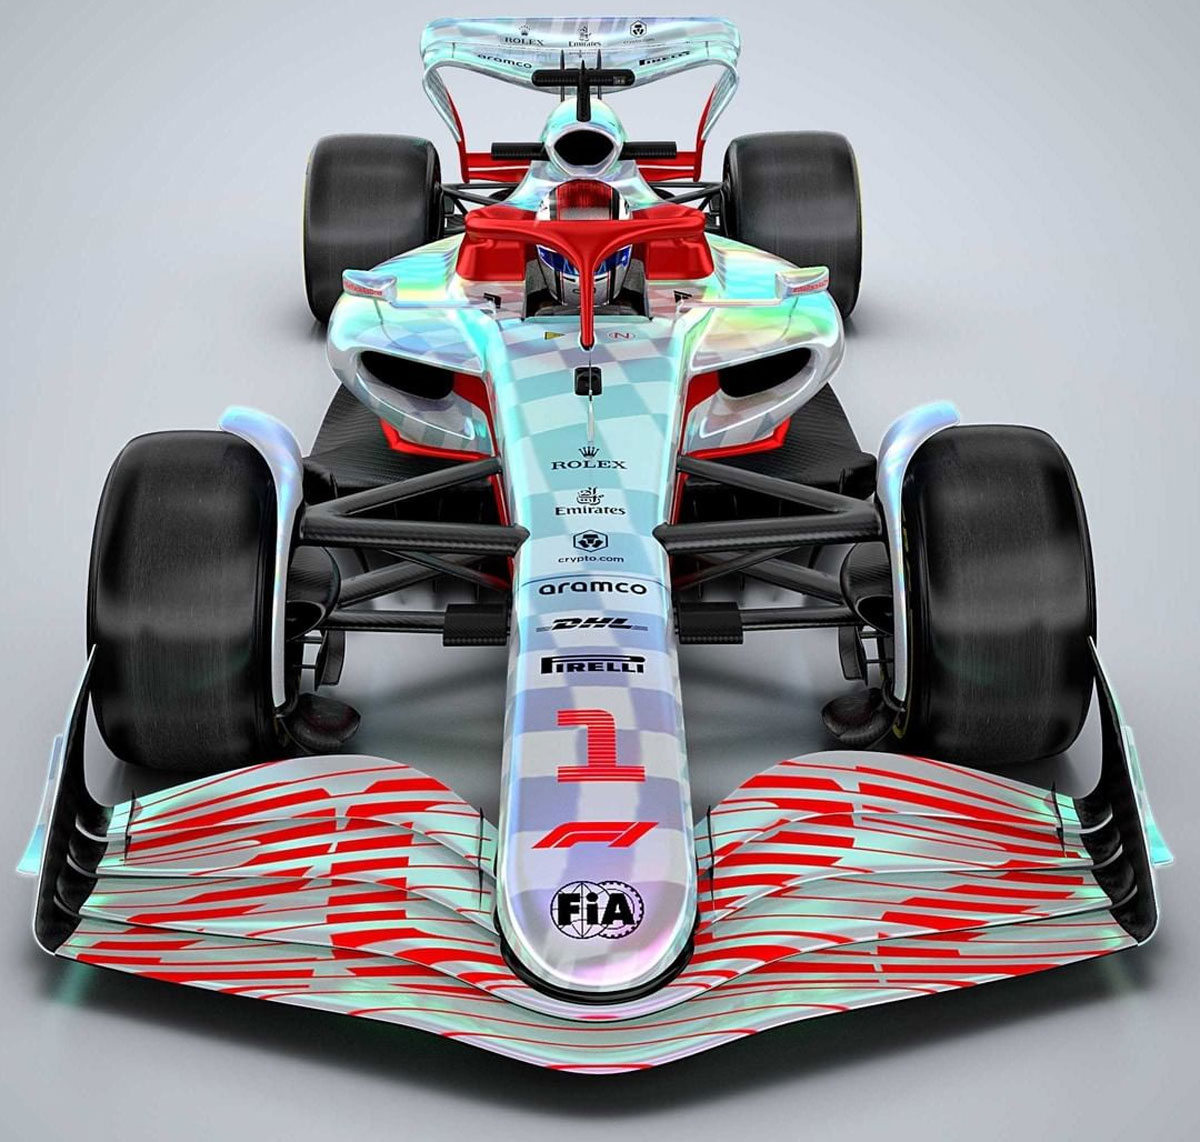 F1 Car 2022 Formula 1 reveals the car of the new age, which gives a